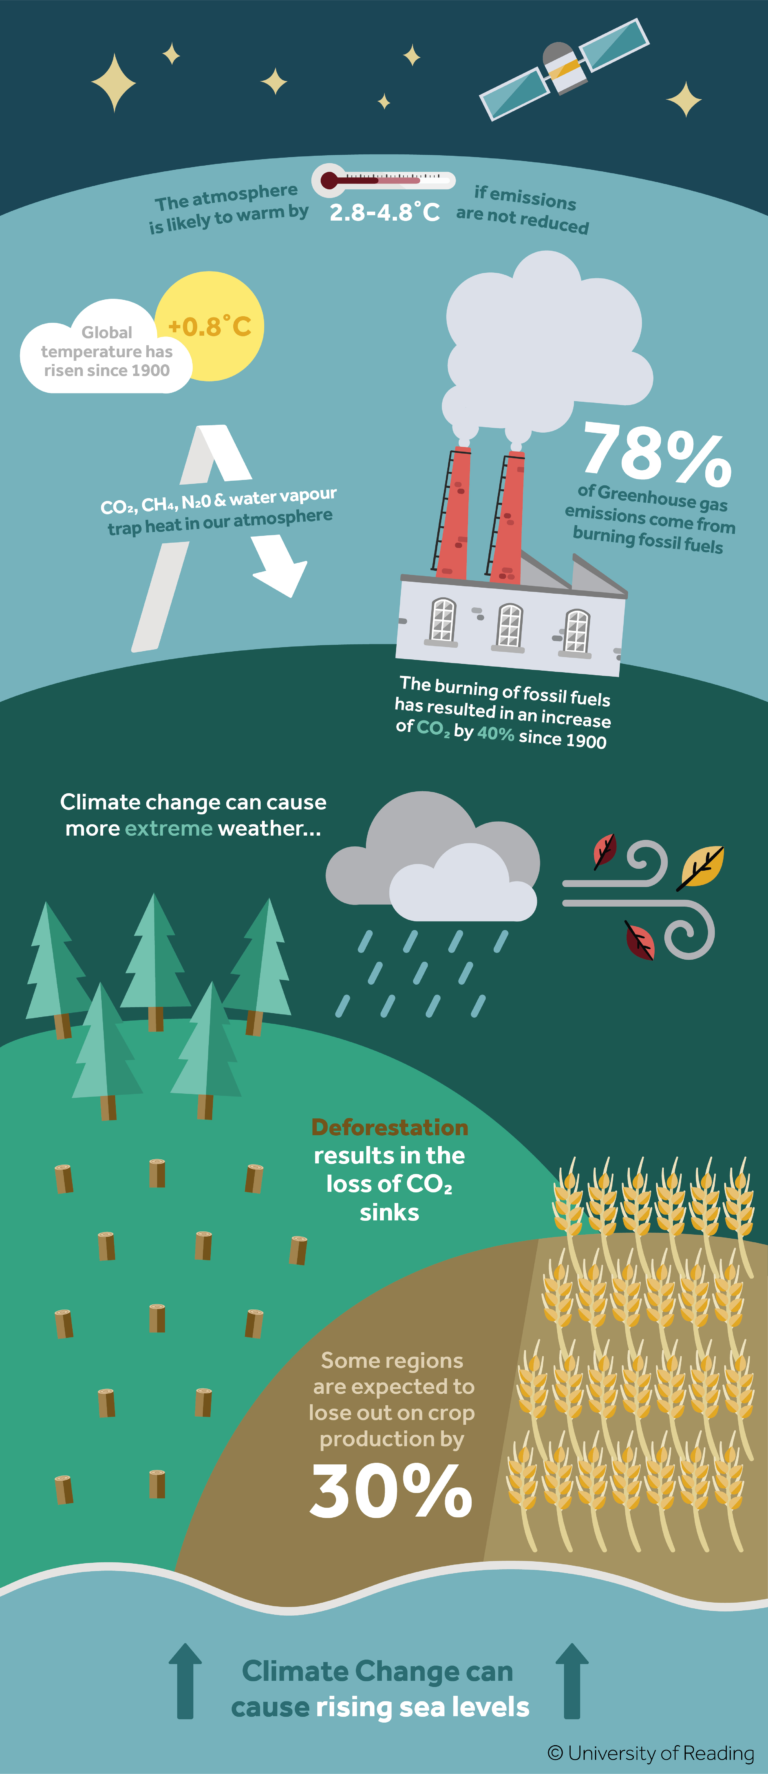 An infographic on climate change stating the following: The atmosphere is likely to warm by 2.8 to 4.8 degrees Celsius if emissions are not reduced. Global temperature has risen 0.8 degrees Celsius since 1900. Carbon dioxide, methane, nitrogen and water vapour trap heat in our atmosphere. 78% of Greenhouse gas emissions come from burning fossil fuels. The burning of fossil fuels has resulted in an increase of carbon dioxide by 40% since 1900. Climate change can cause more extreme weather. Deforestation results in the loss of carbon dioxide sinks. Some regions are expected to lose out on crop production by 30%. Climate change can cause rising sea levels.